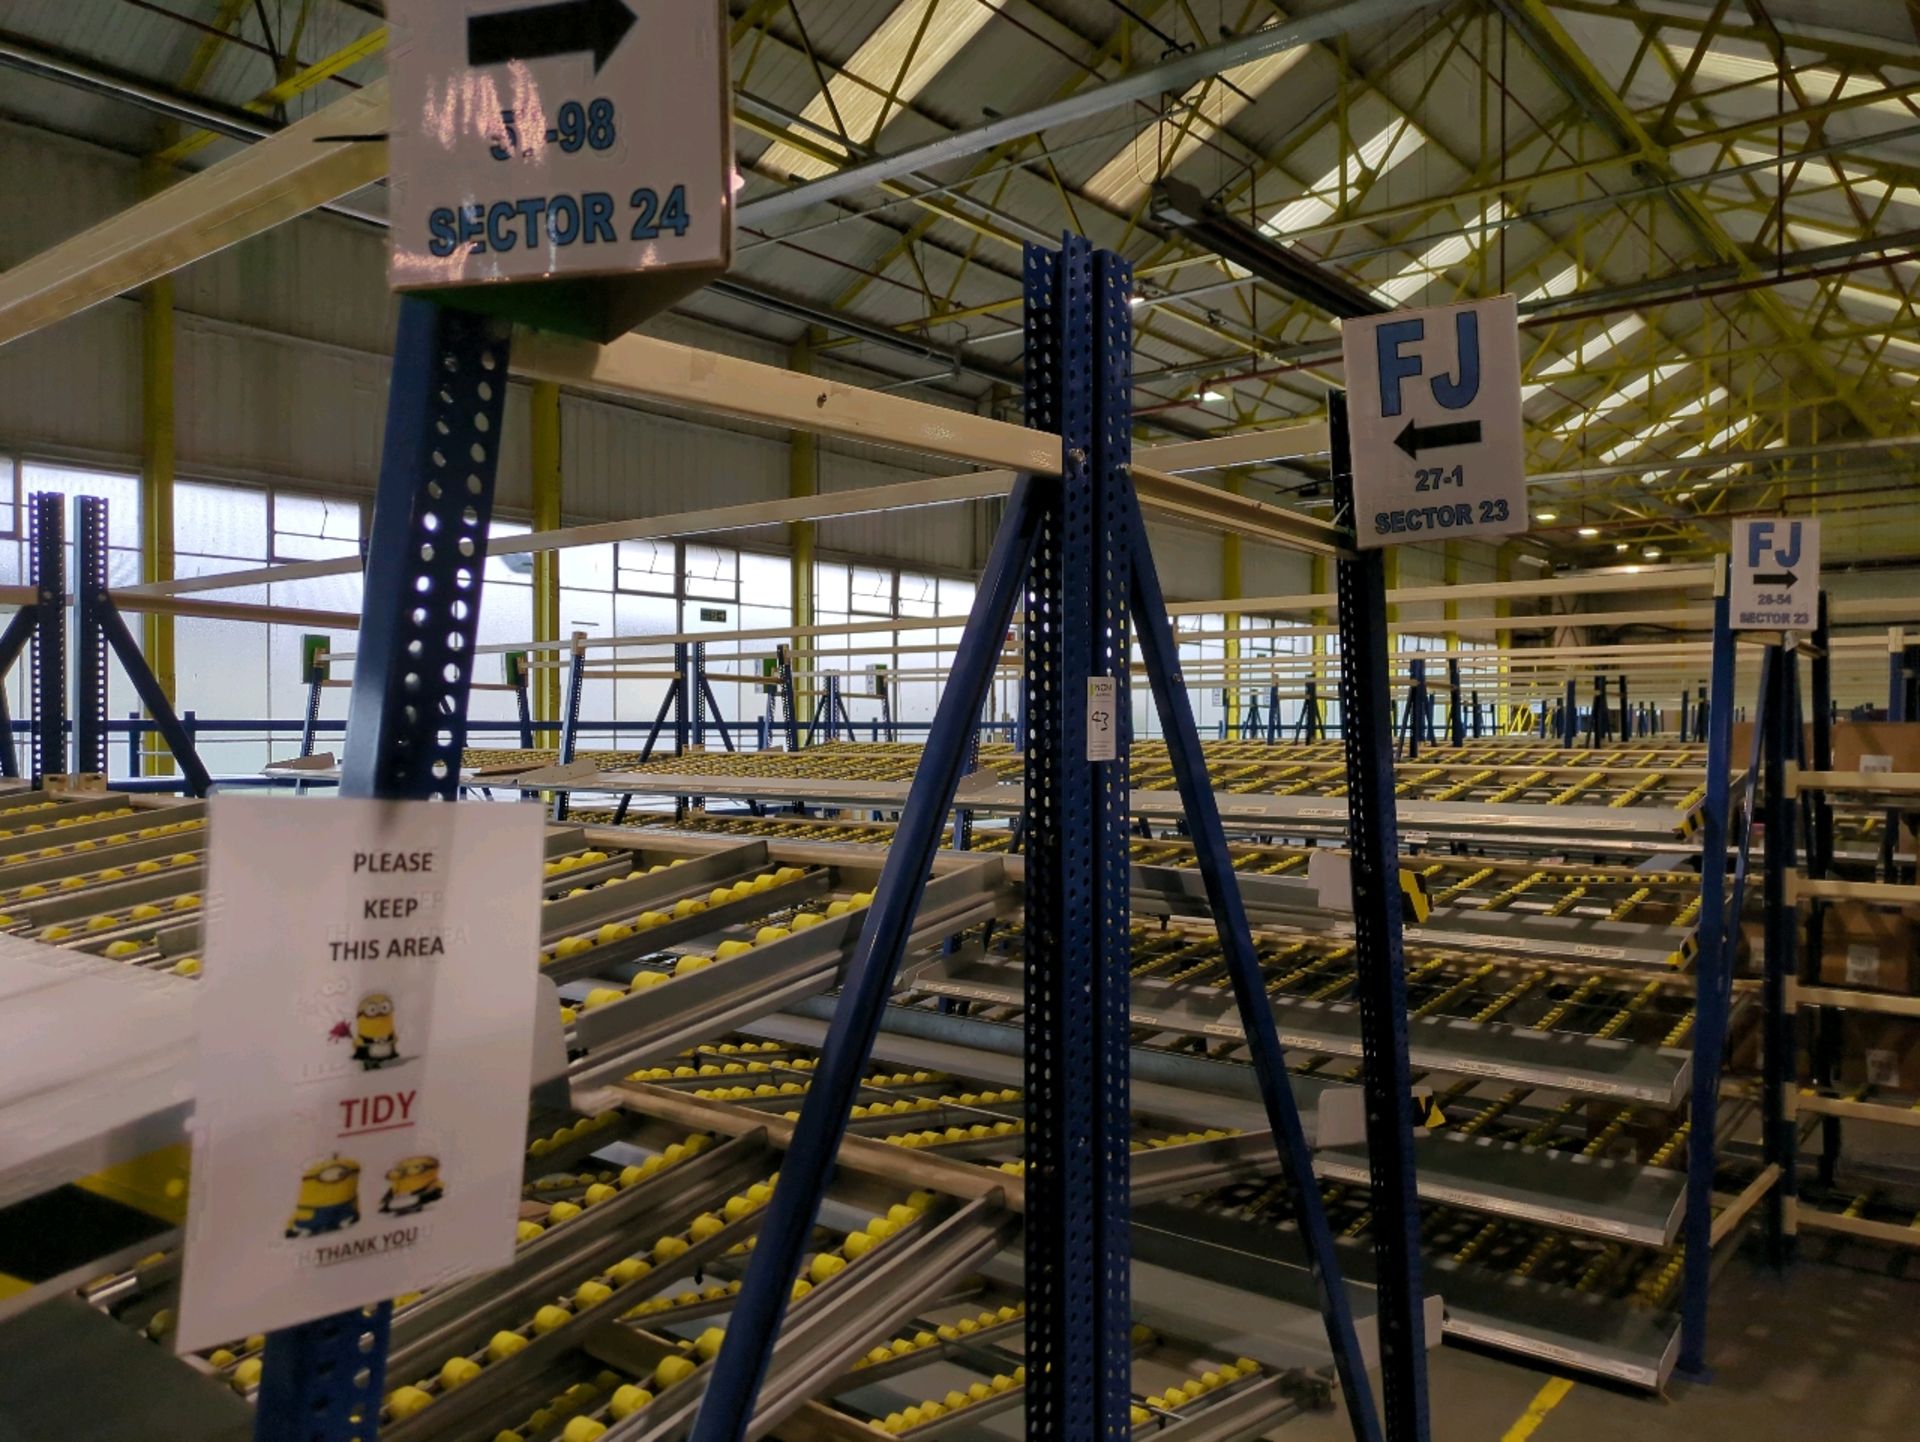 A Run Of 6 Bays Of Back To Back Flow Racks - Image 10 of 11